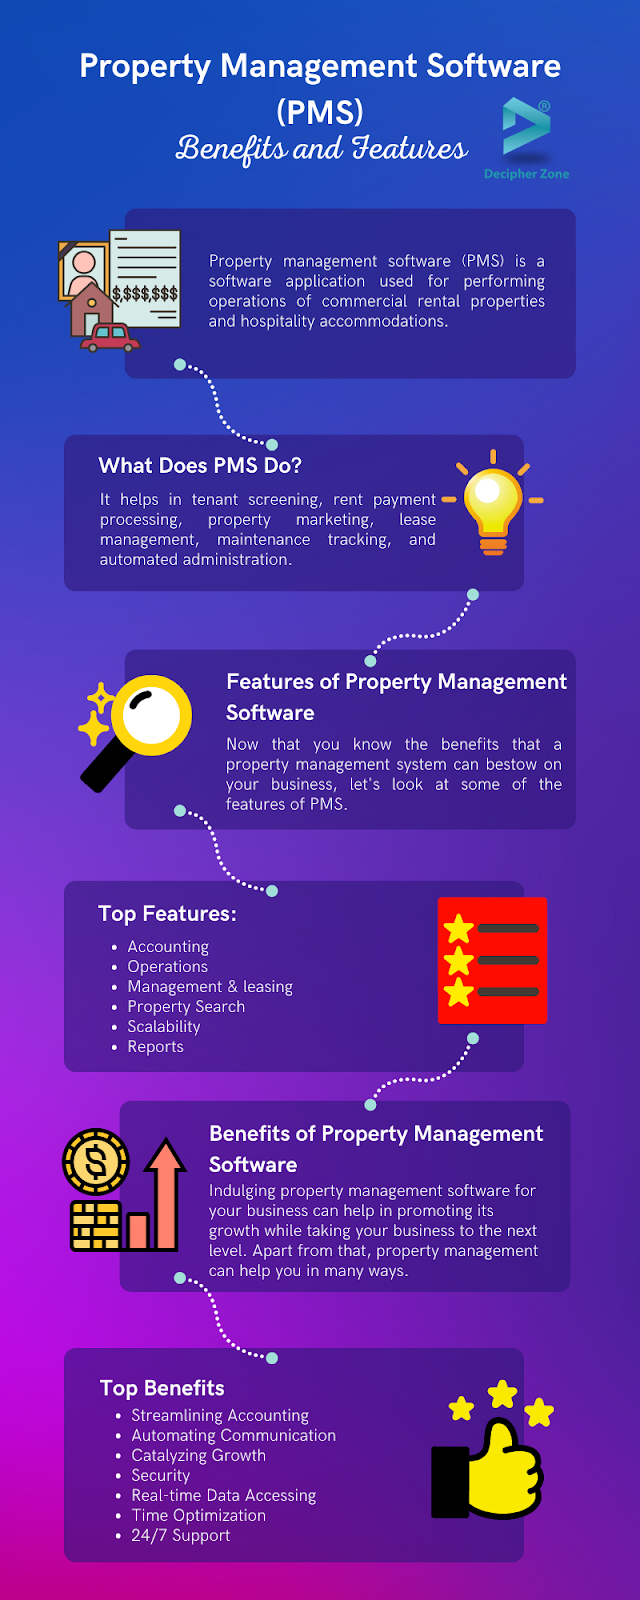 Why Do You Need Property Management Software As A Small Business Owner?\n